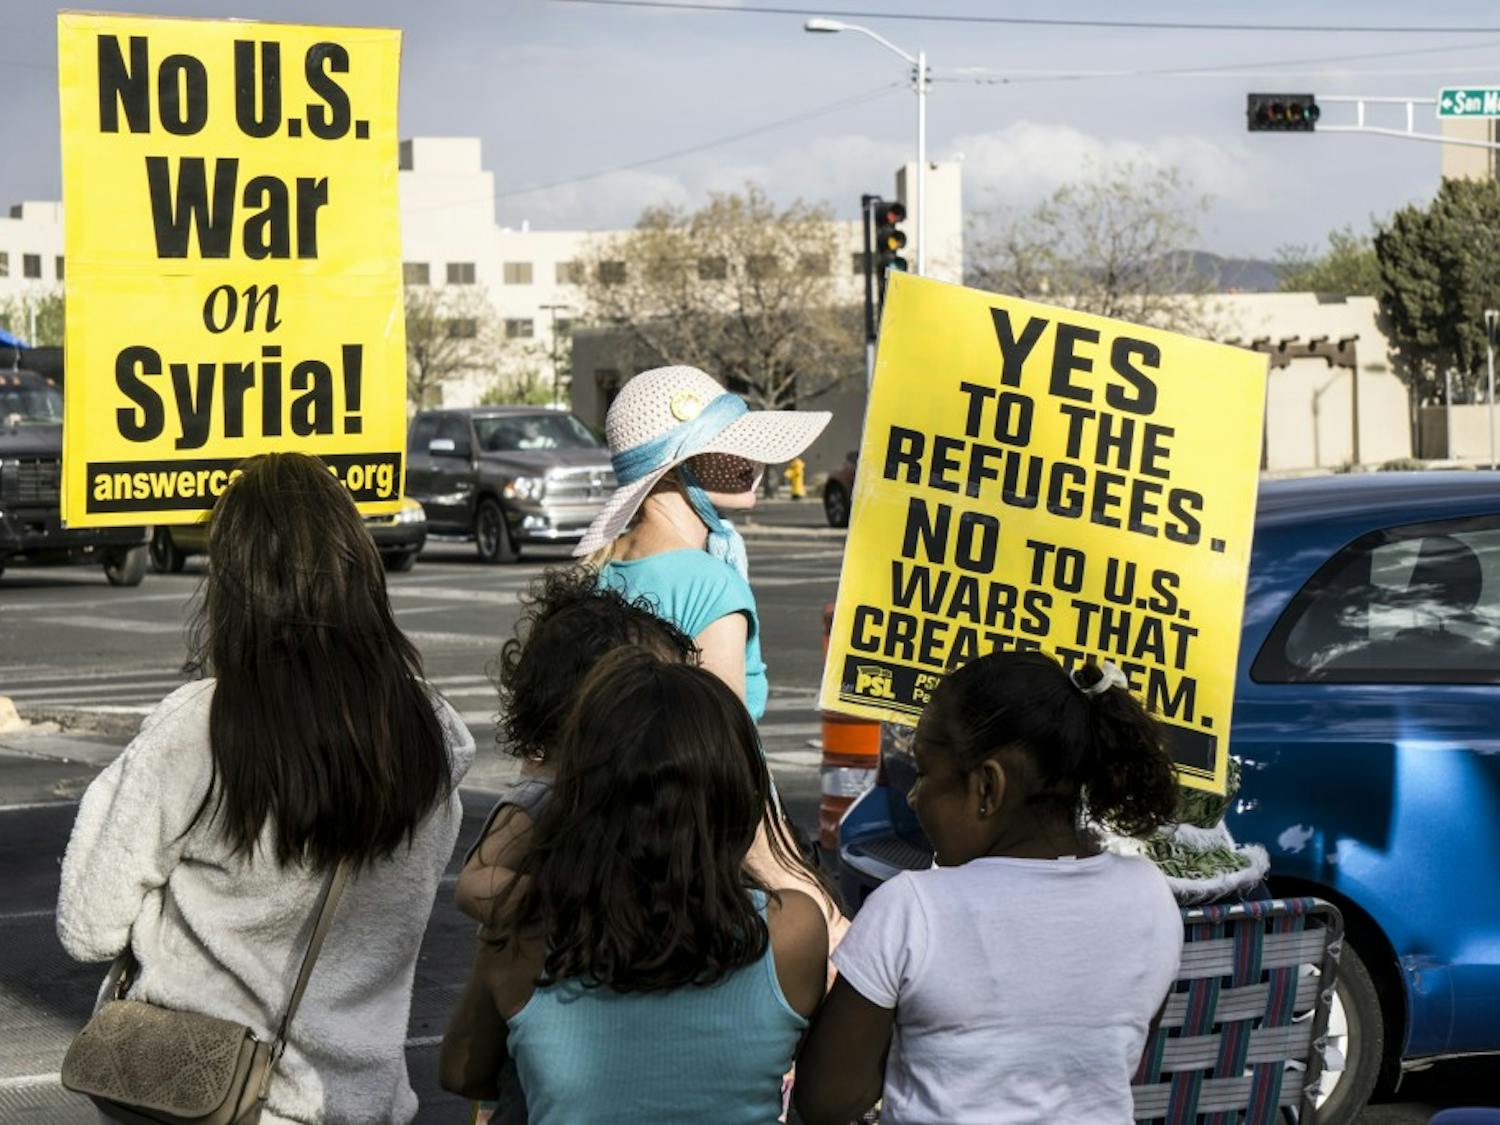 Albuquerque protesters gather on April 12, 2018 at the corner of Girard and San Mateo to protest in response to a tweet by President Donald Trump concerning a possible airstrike on Syria.